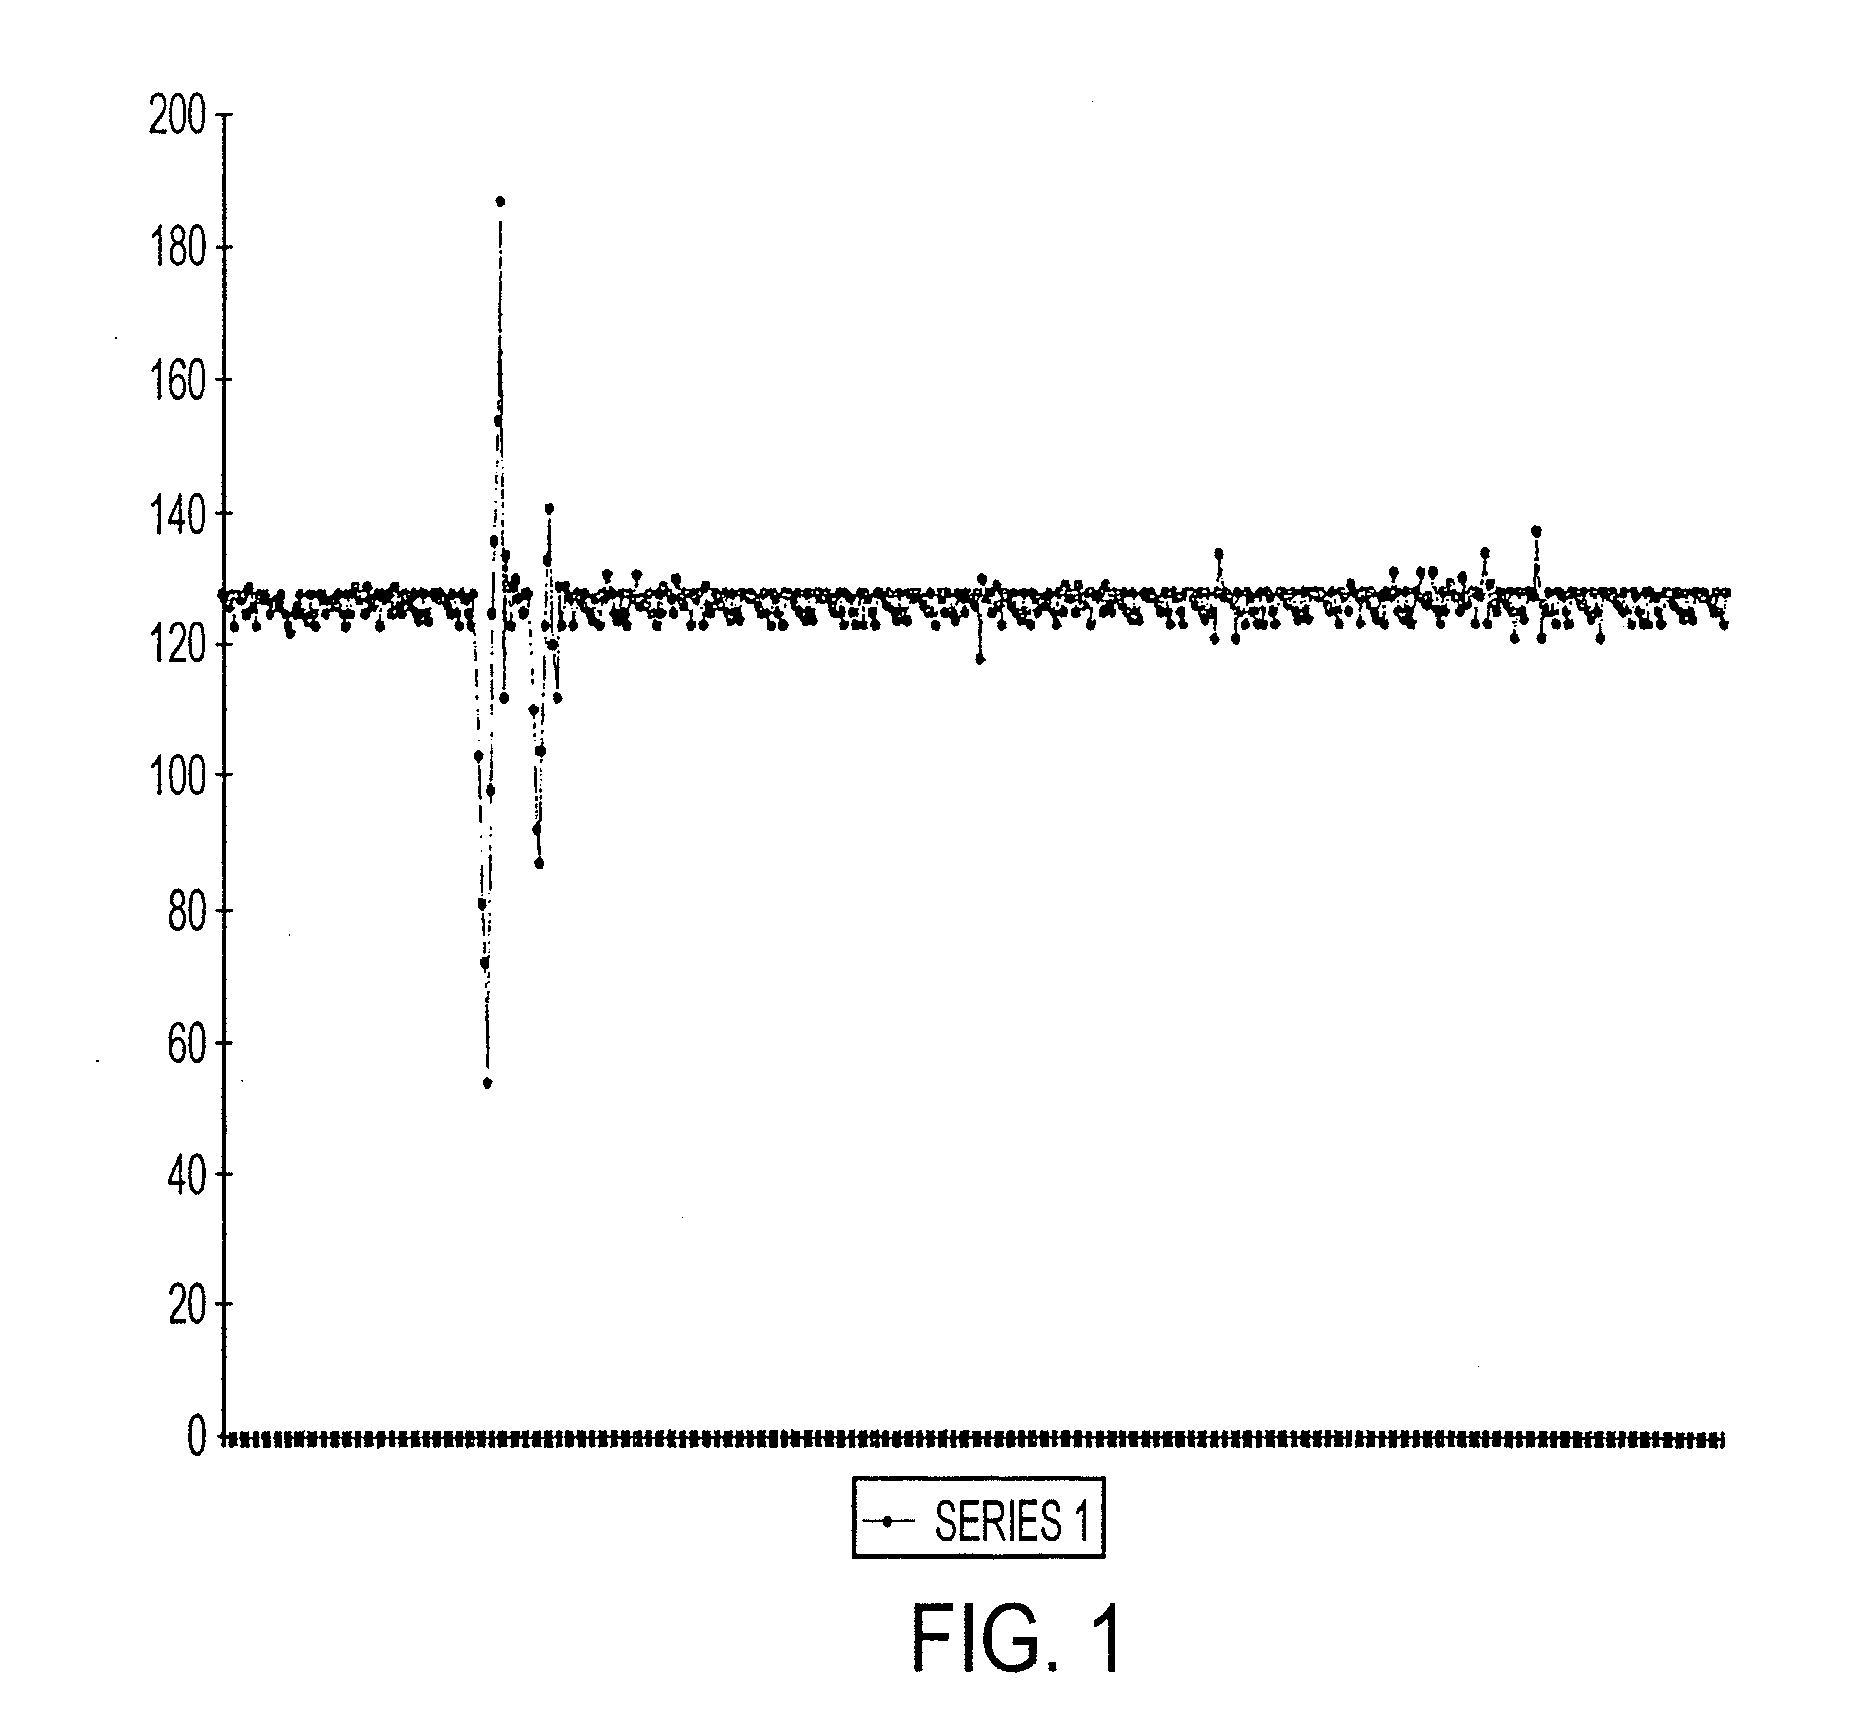 Apparatus and method for wireless autonomous infant mobility detection, monitoring, analysis and alarm event generation